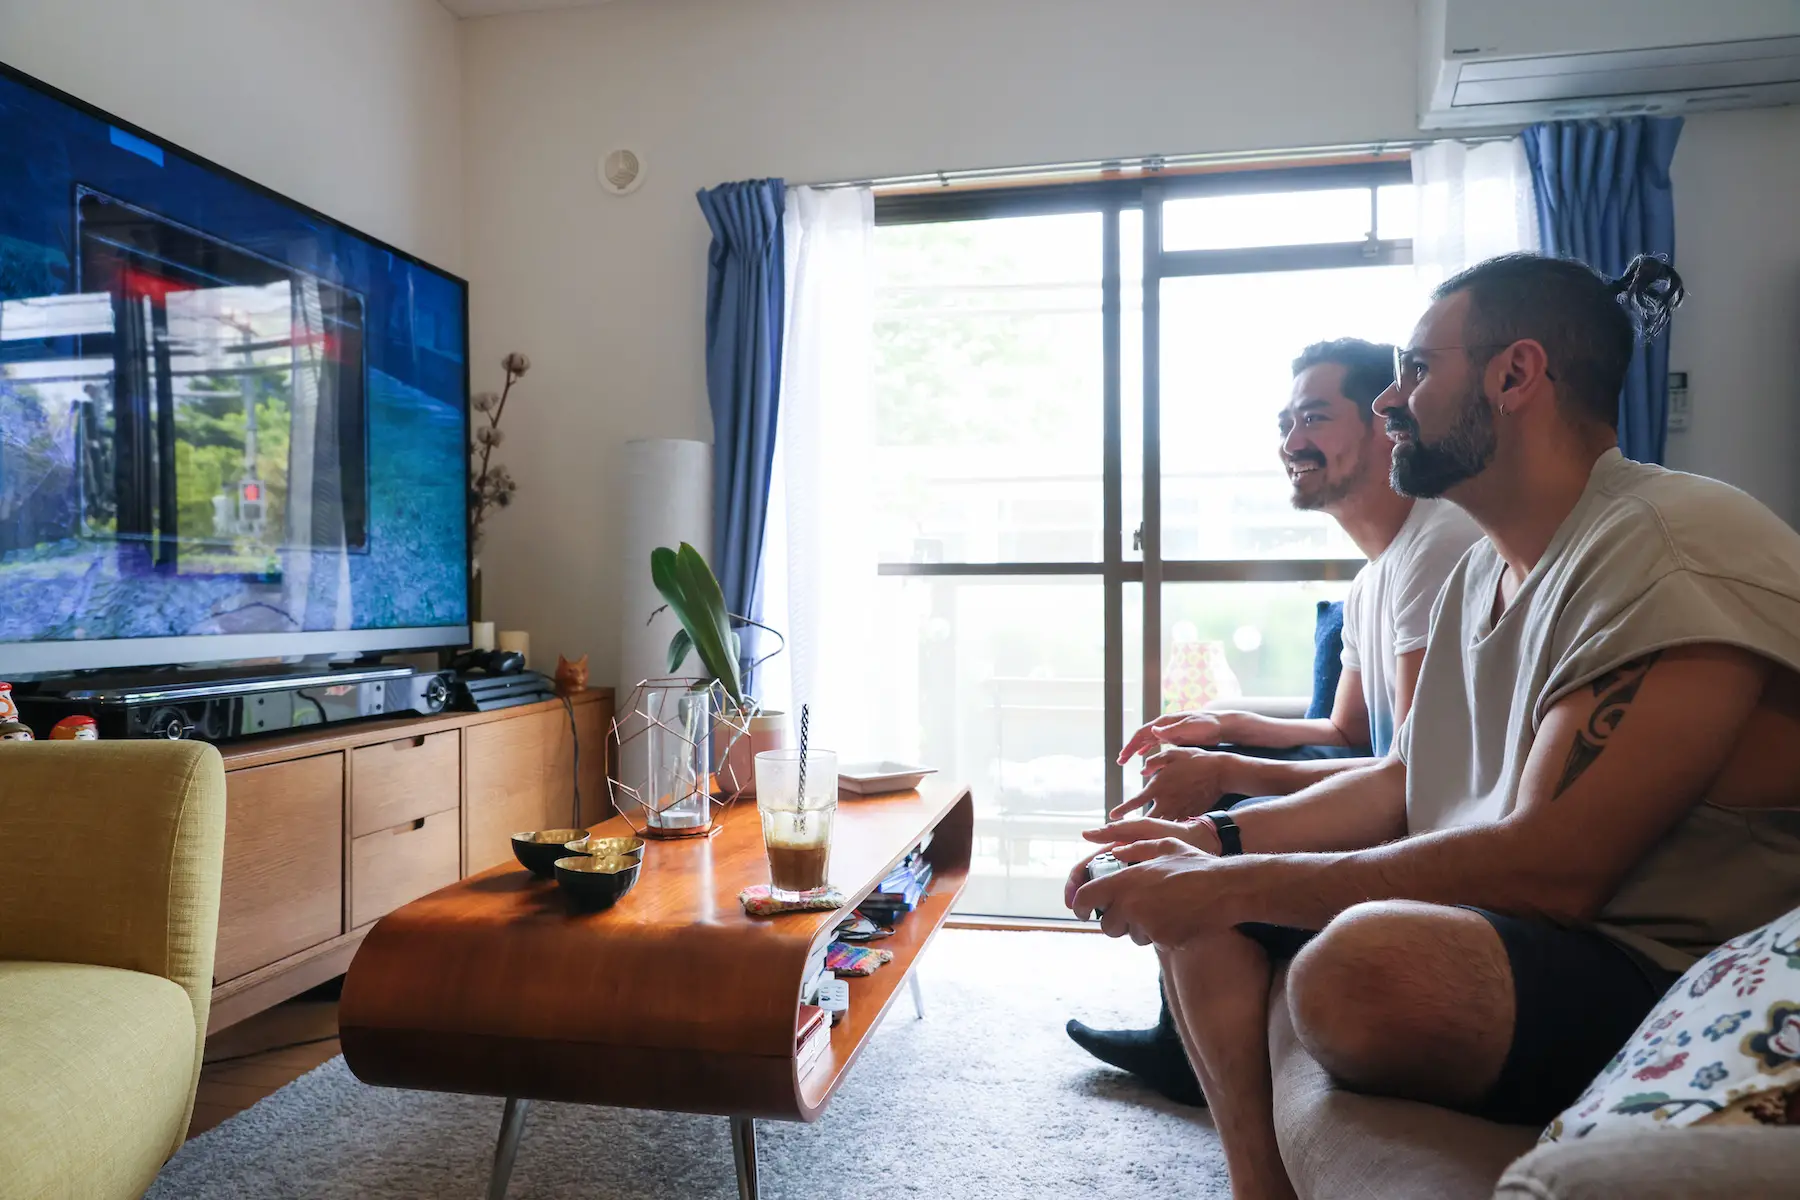 Two men sit on a couch side-by-side in front of a television playing a video game and laughing